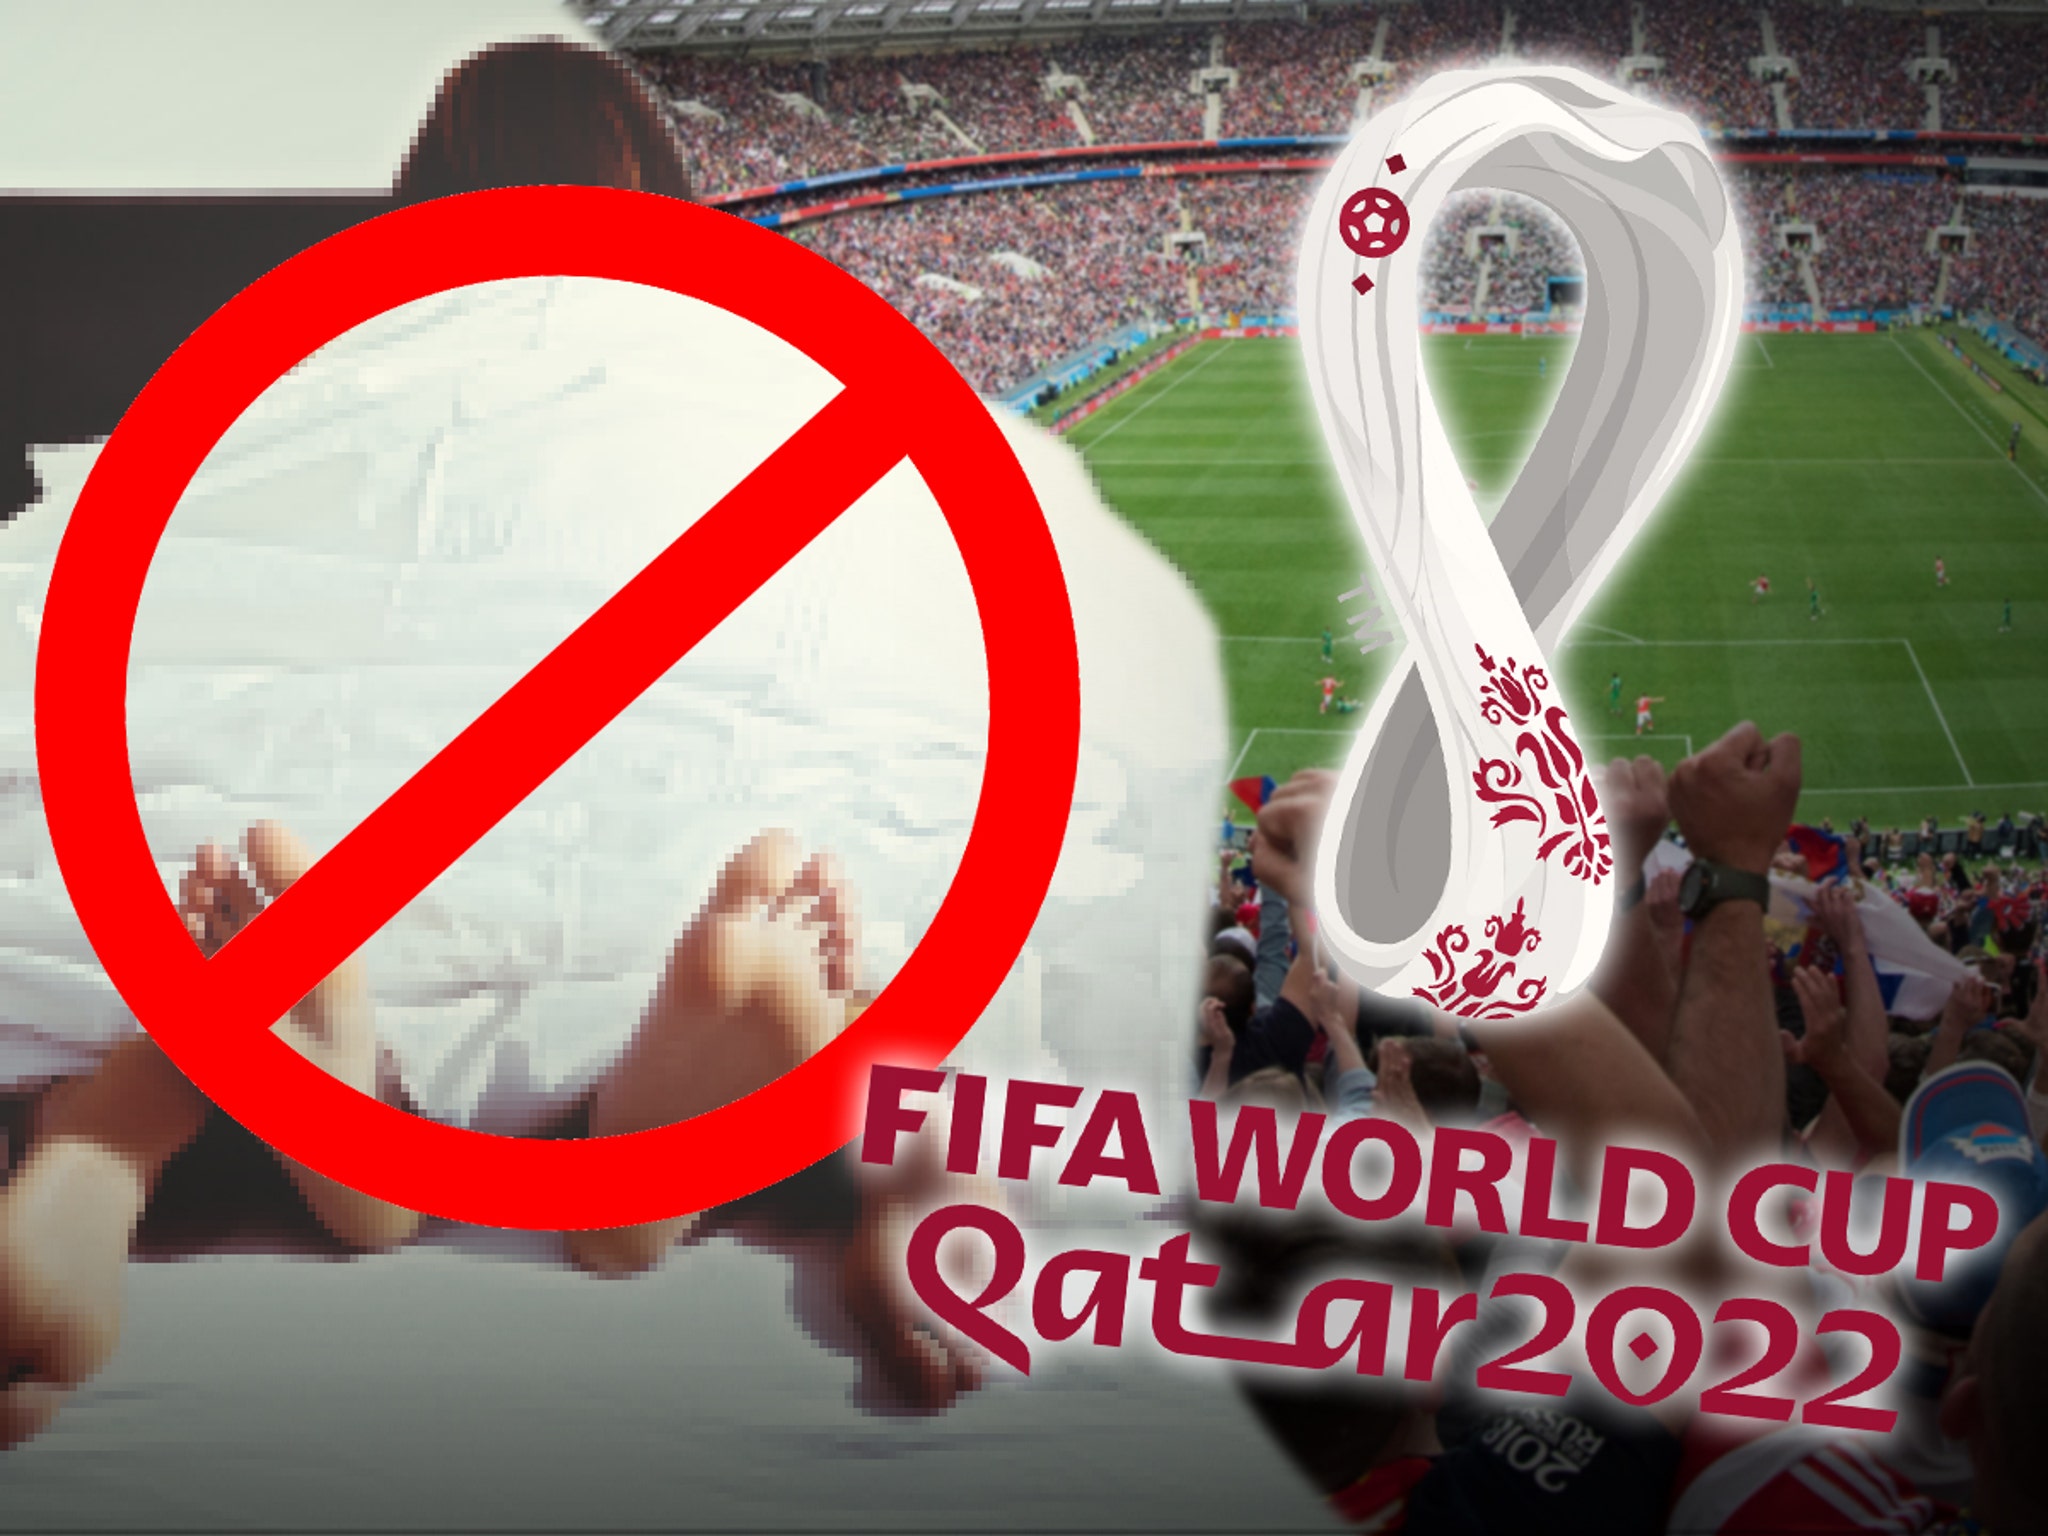 Sex Video From The Qatarxnxx - Qatar Reportedly Bans Single World Cup Fans From Sex, Could Face 7 Years  Behind Bars